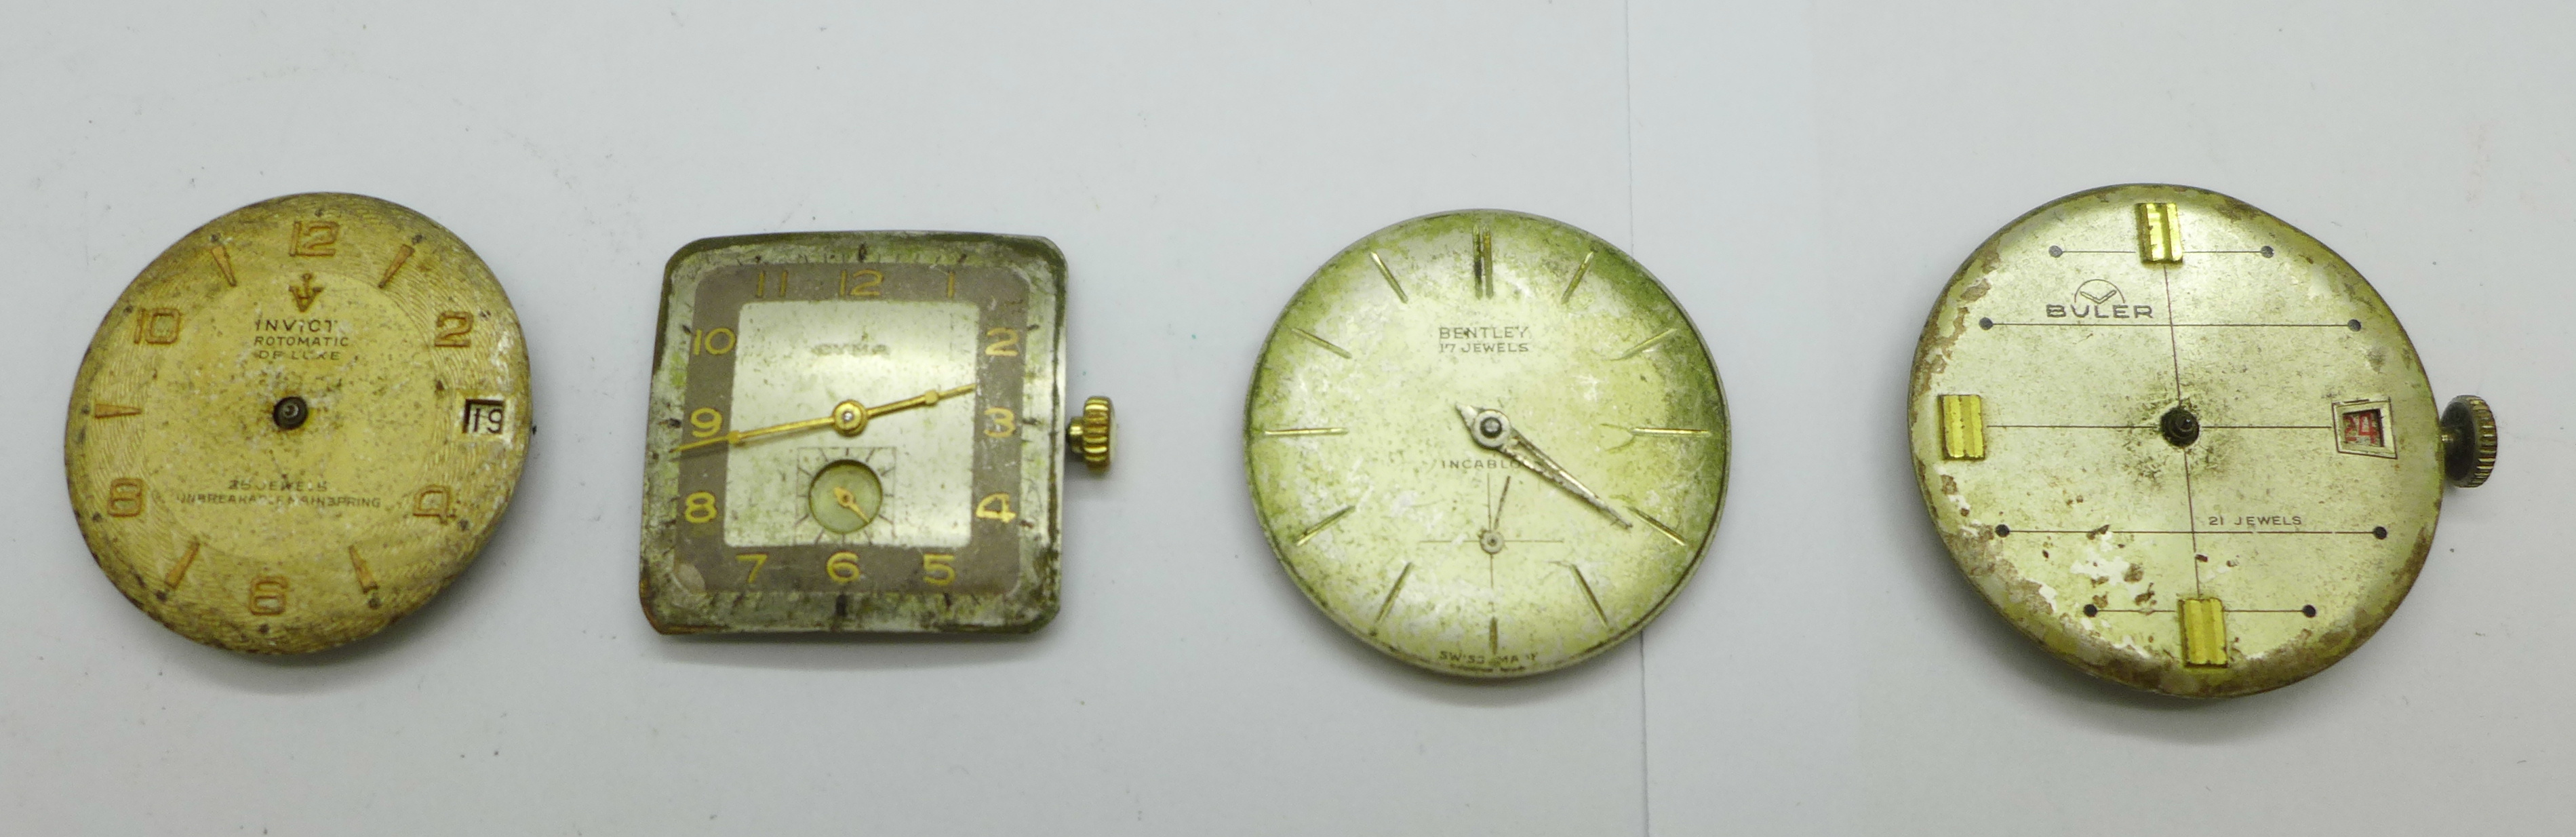 Four wristwatch movements; Buler, Bentley, Invicta and Cyma, a/f - Image 2 of 11